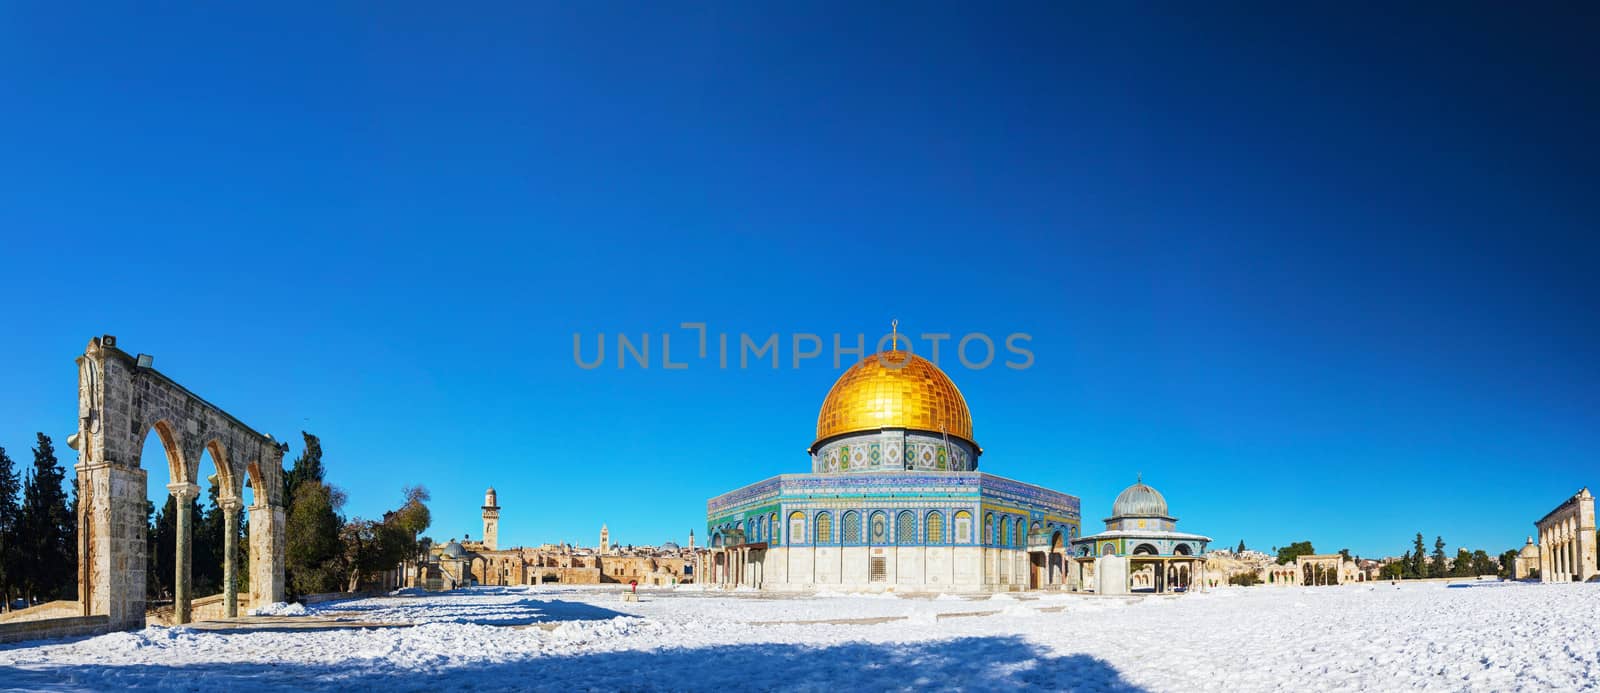 Dome of the Rock mosque in Jerusalem by AndreyKr